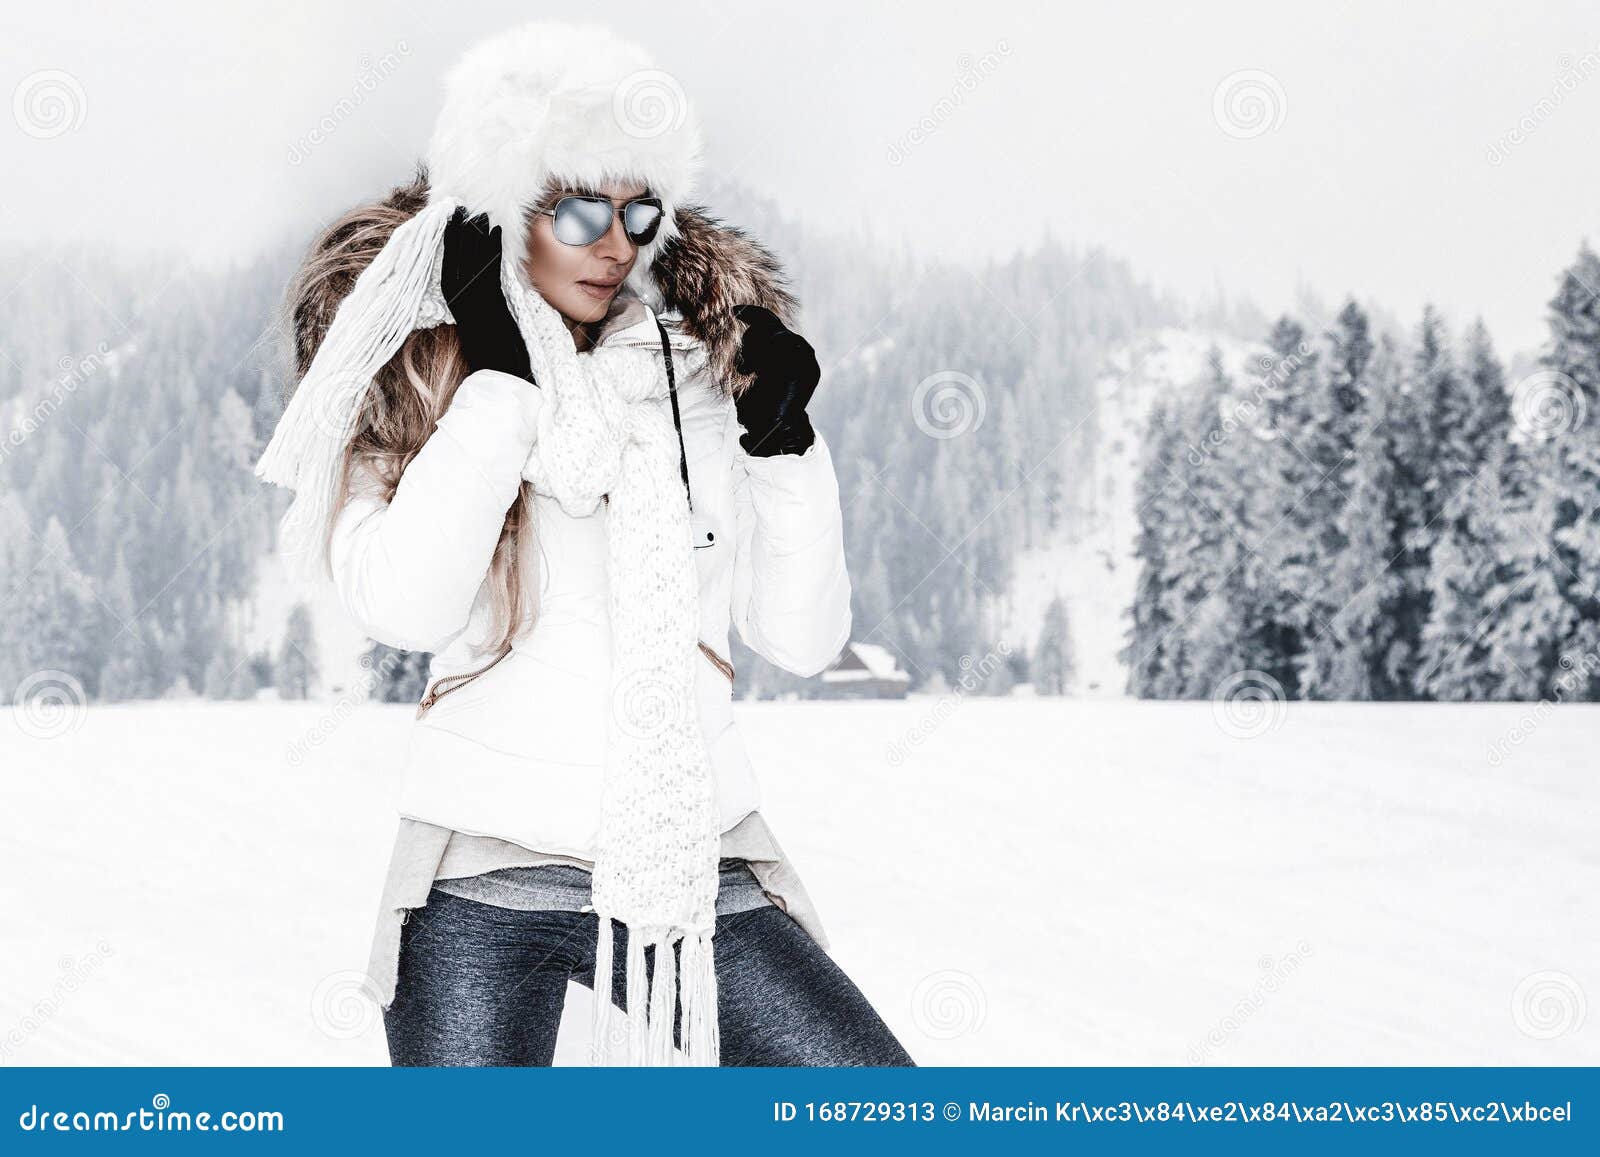 Fashion Woman With Goggles Winter Portrait Stock Photo - Download